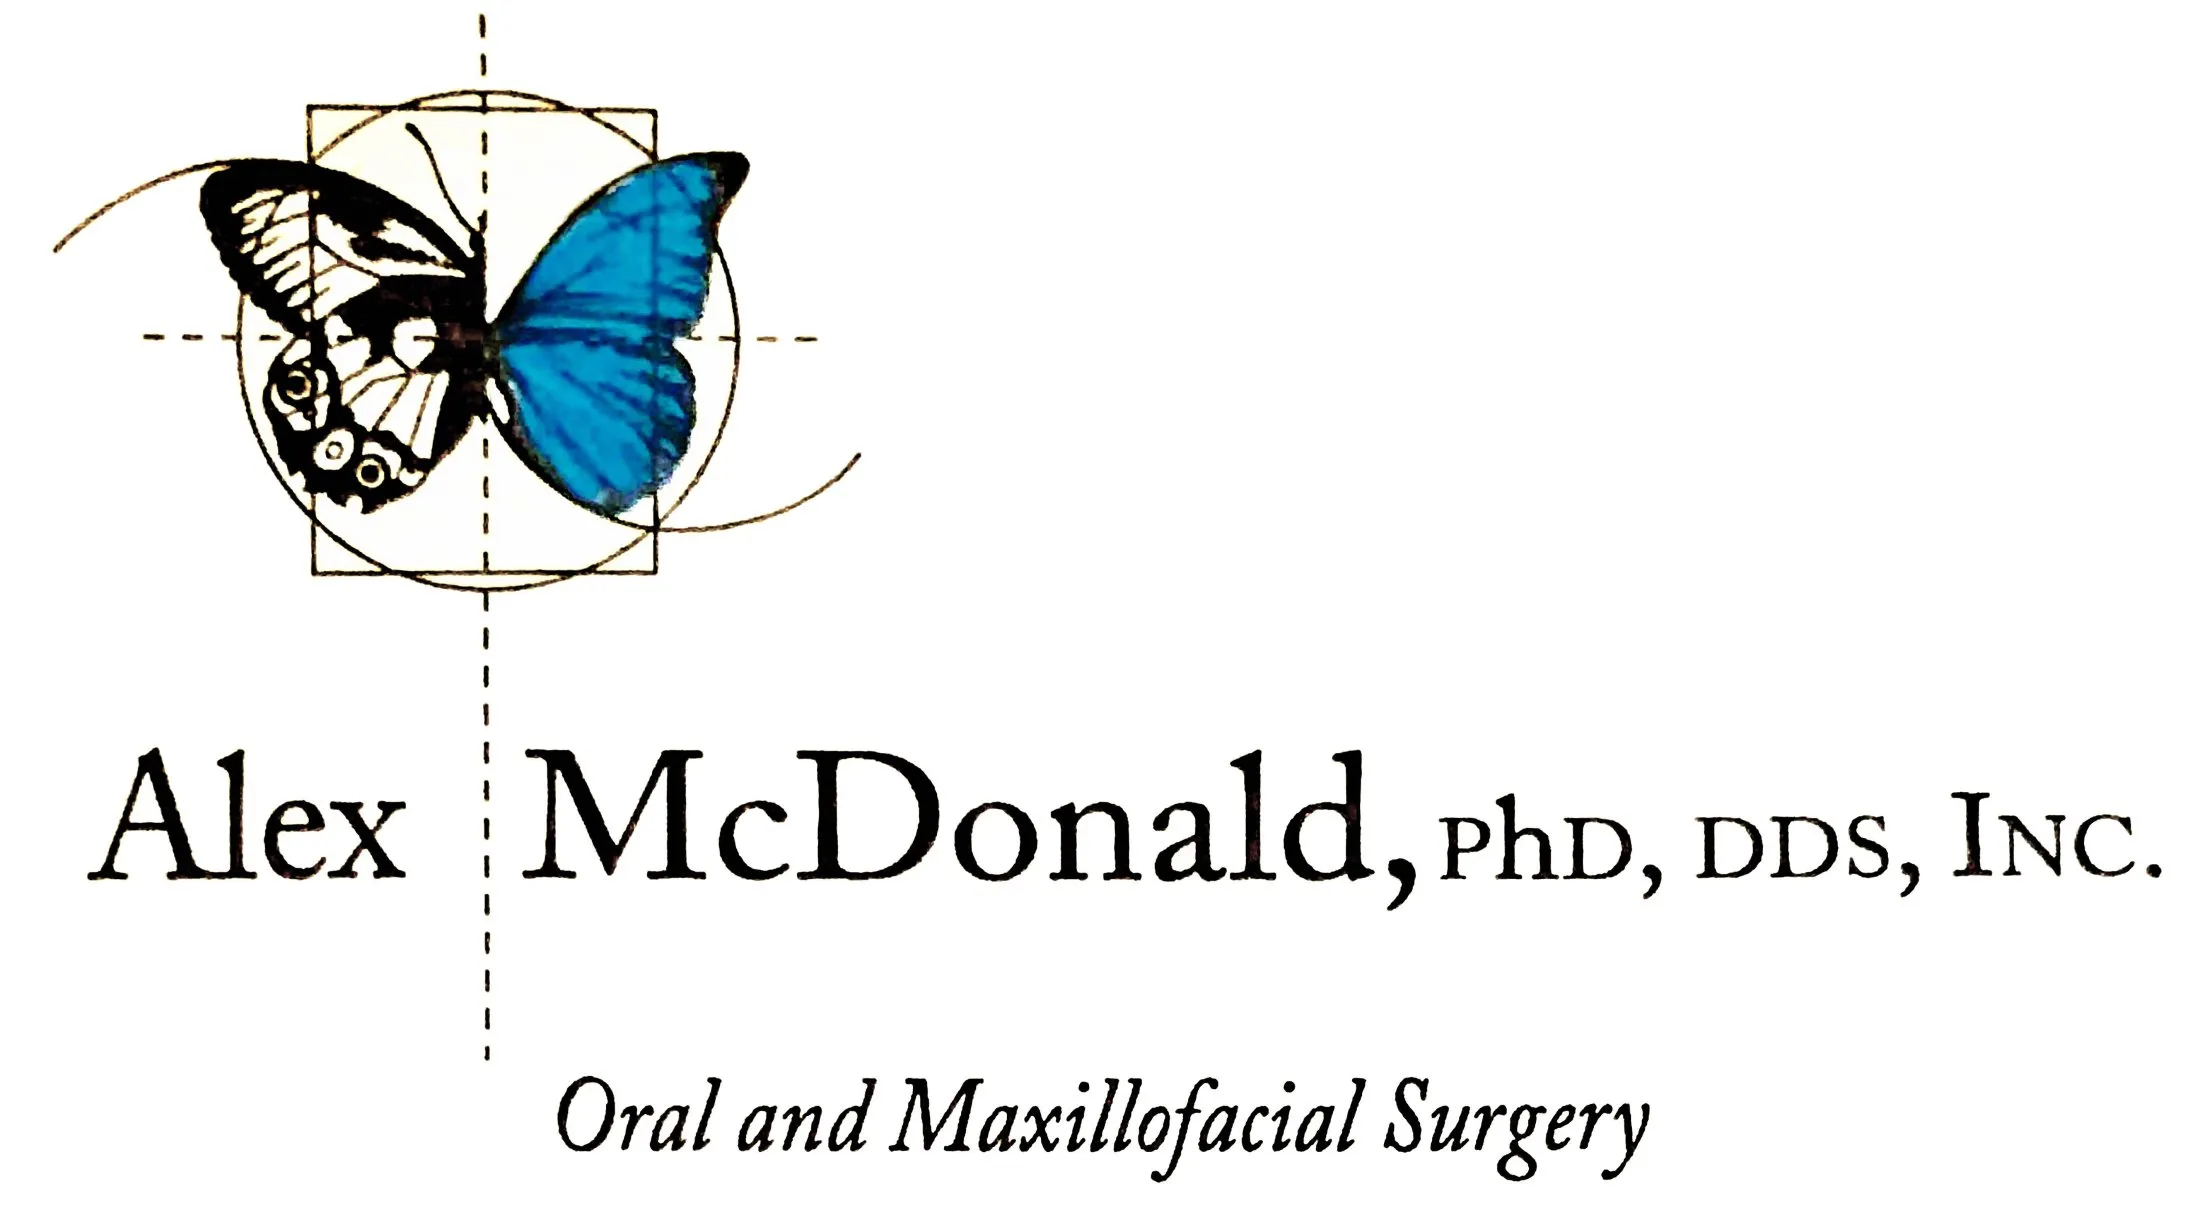 Link to Alex R. McDonald, PhD, DDS, Inc. home page